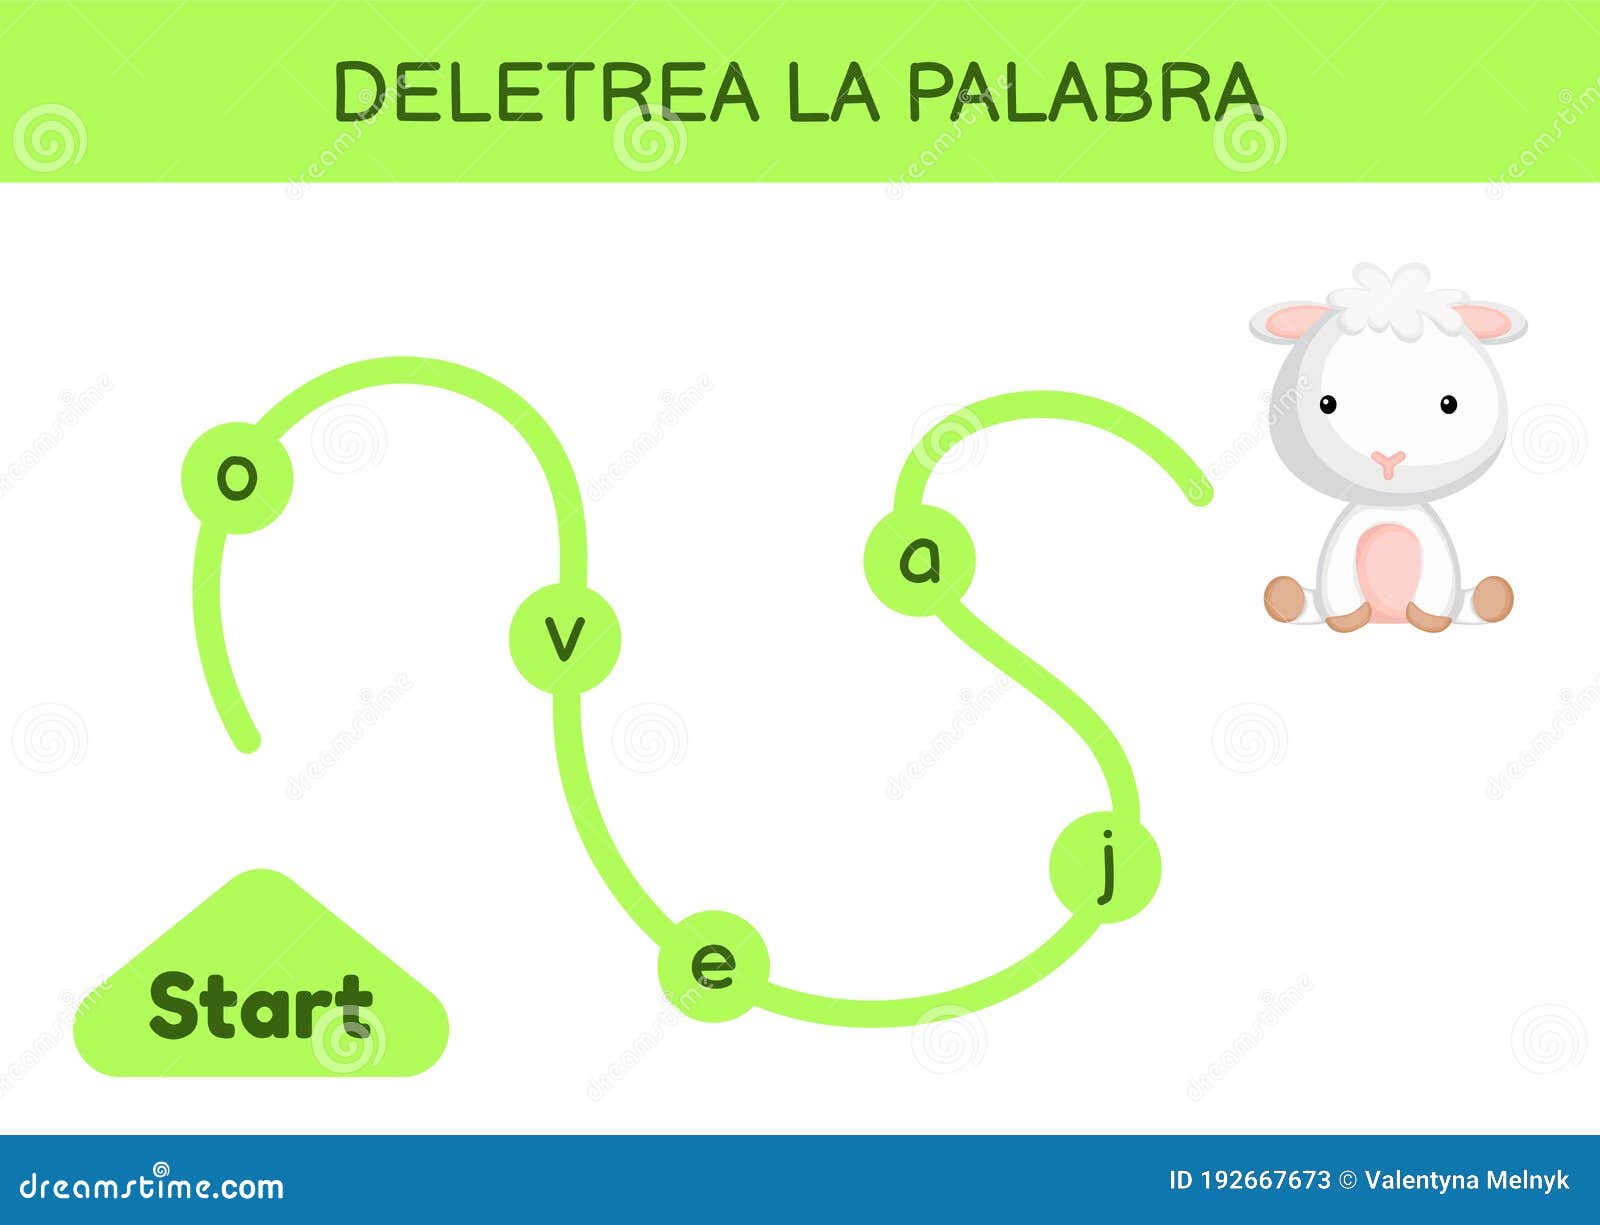 deletrea la palabra - spell the word. maze for kids. spelling word game template. learn to read word sheep. activity page for